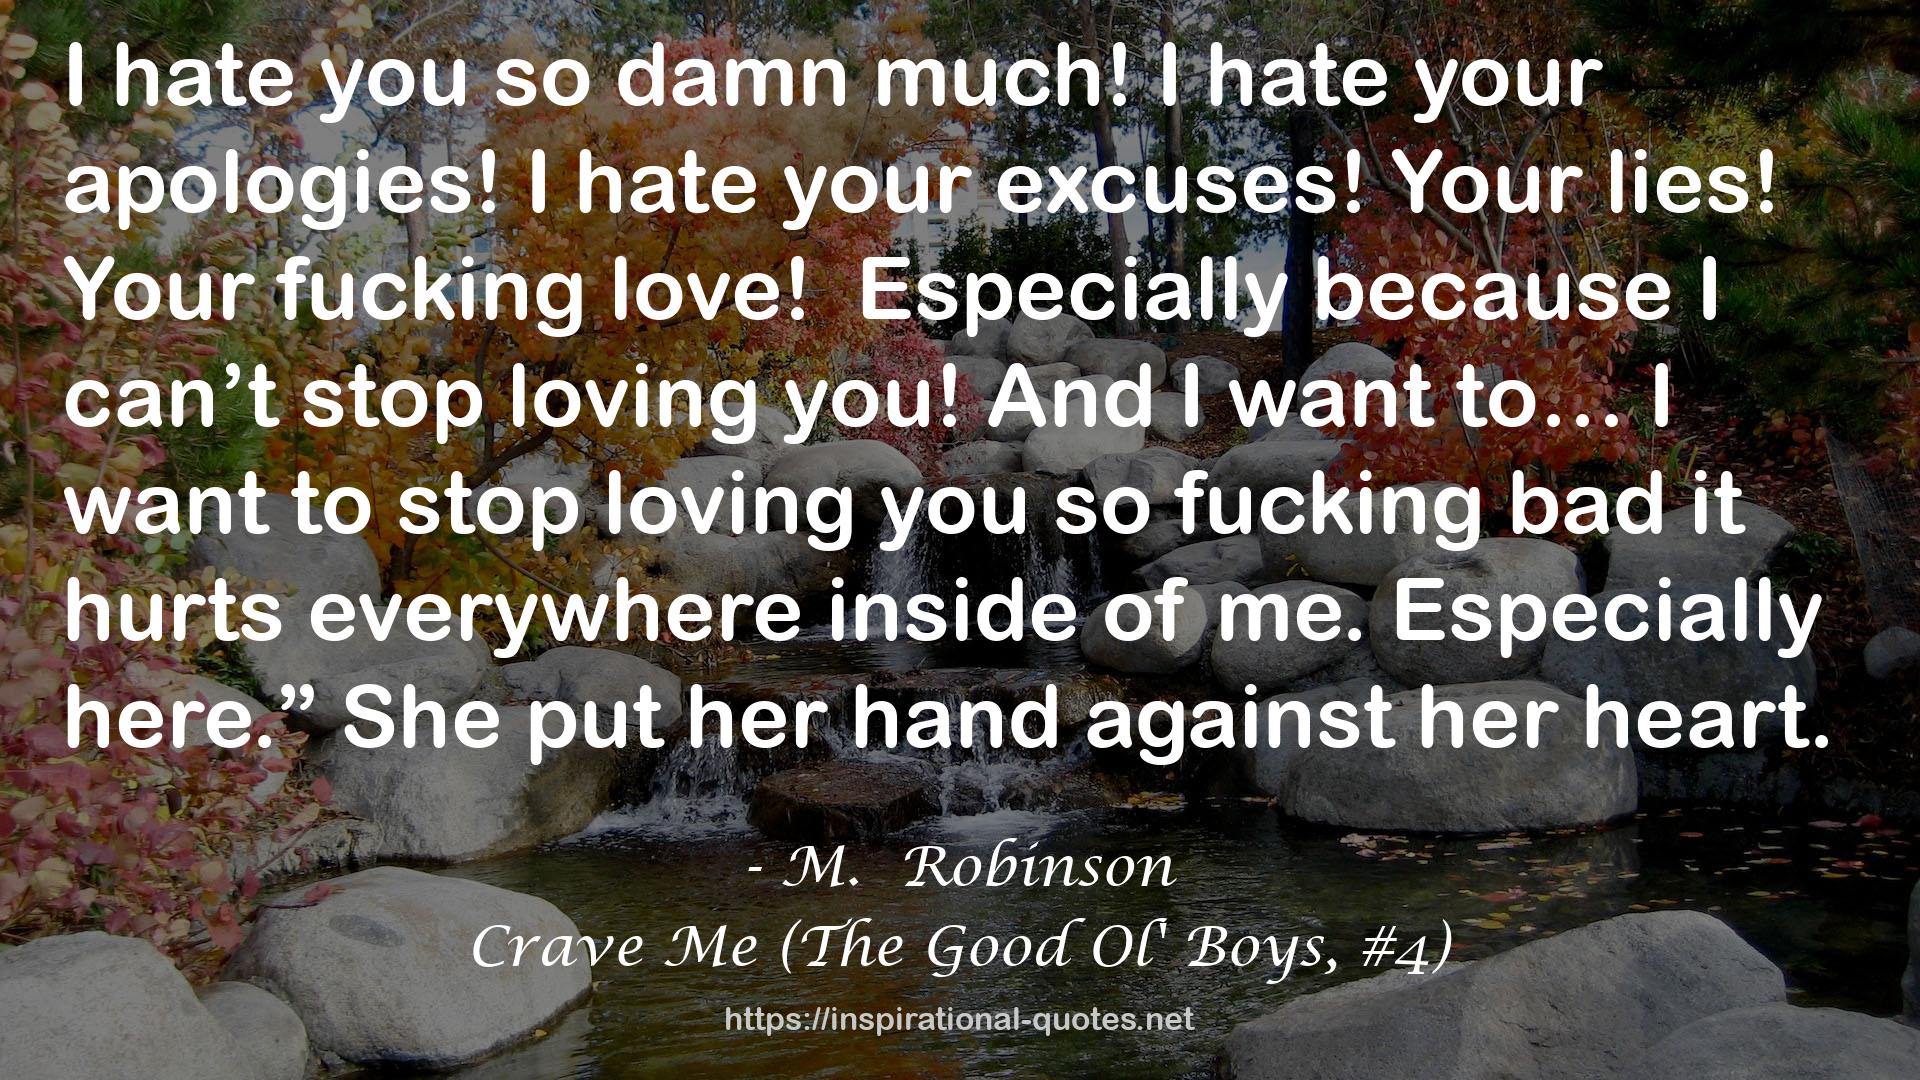 Crave Me (The Good Ol' Boys, #4) QUOTES